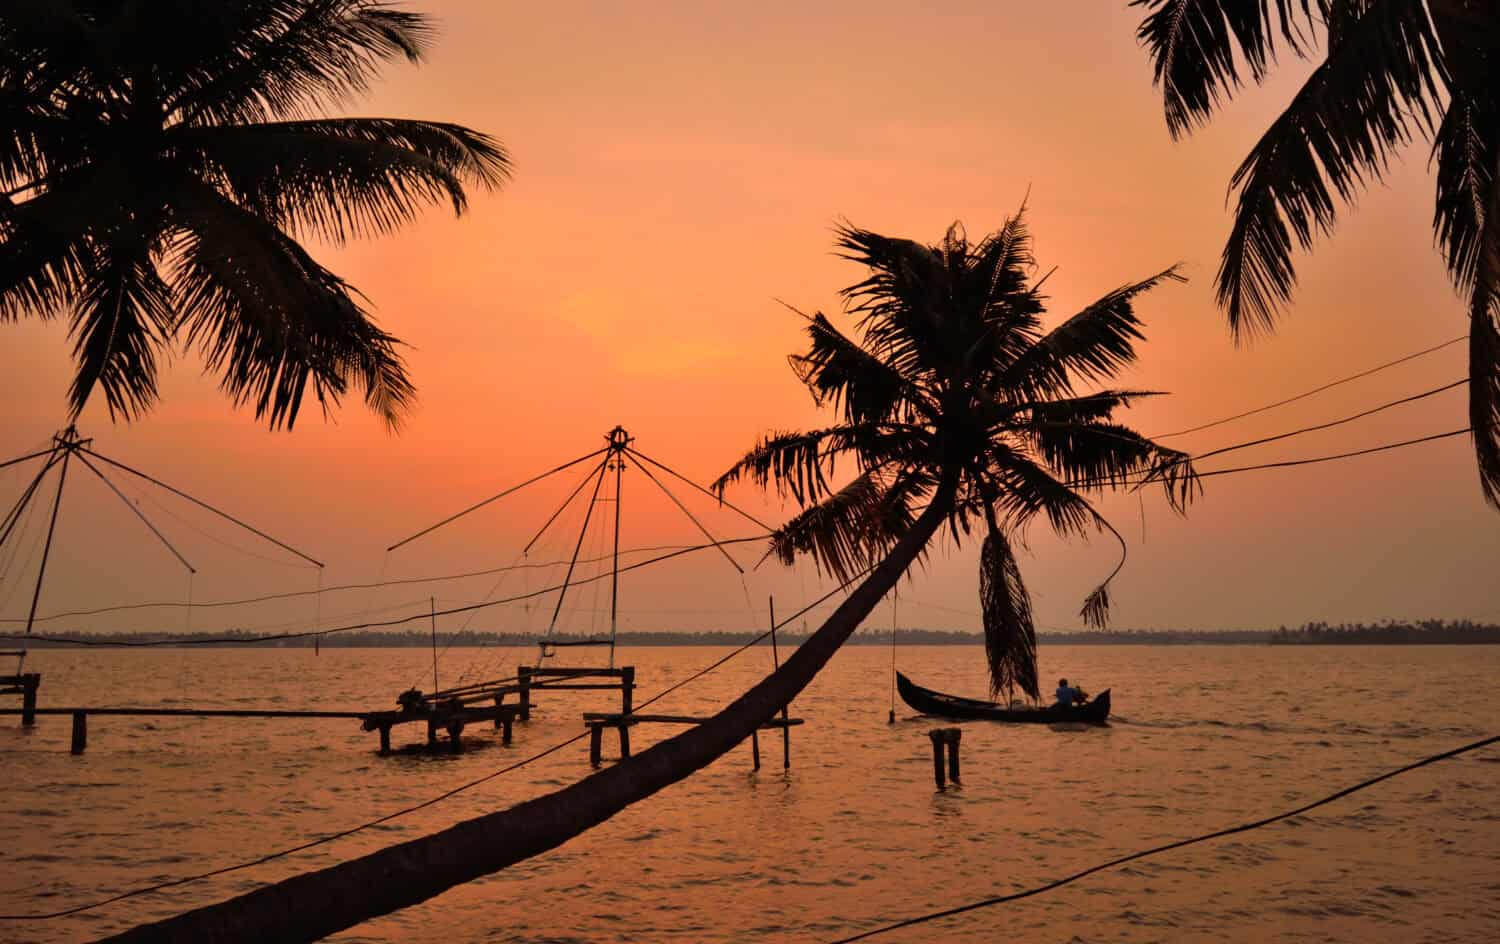 Silhouette of coconut trees along with chinese fishing nets in kumbalangi, a suburb of kochi during sunset.